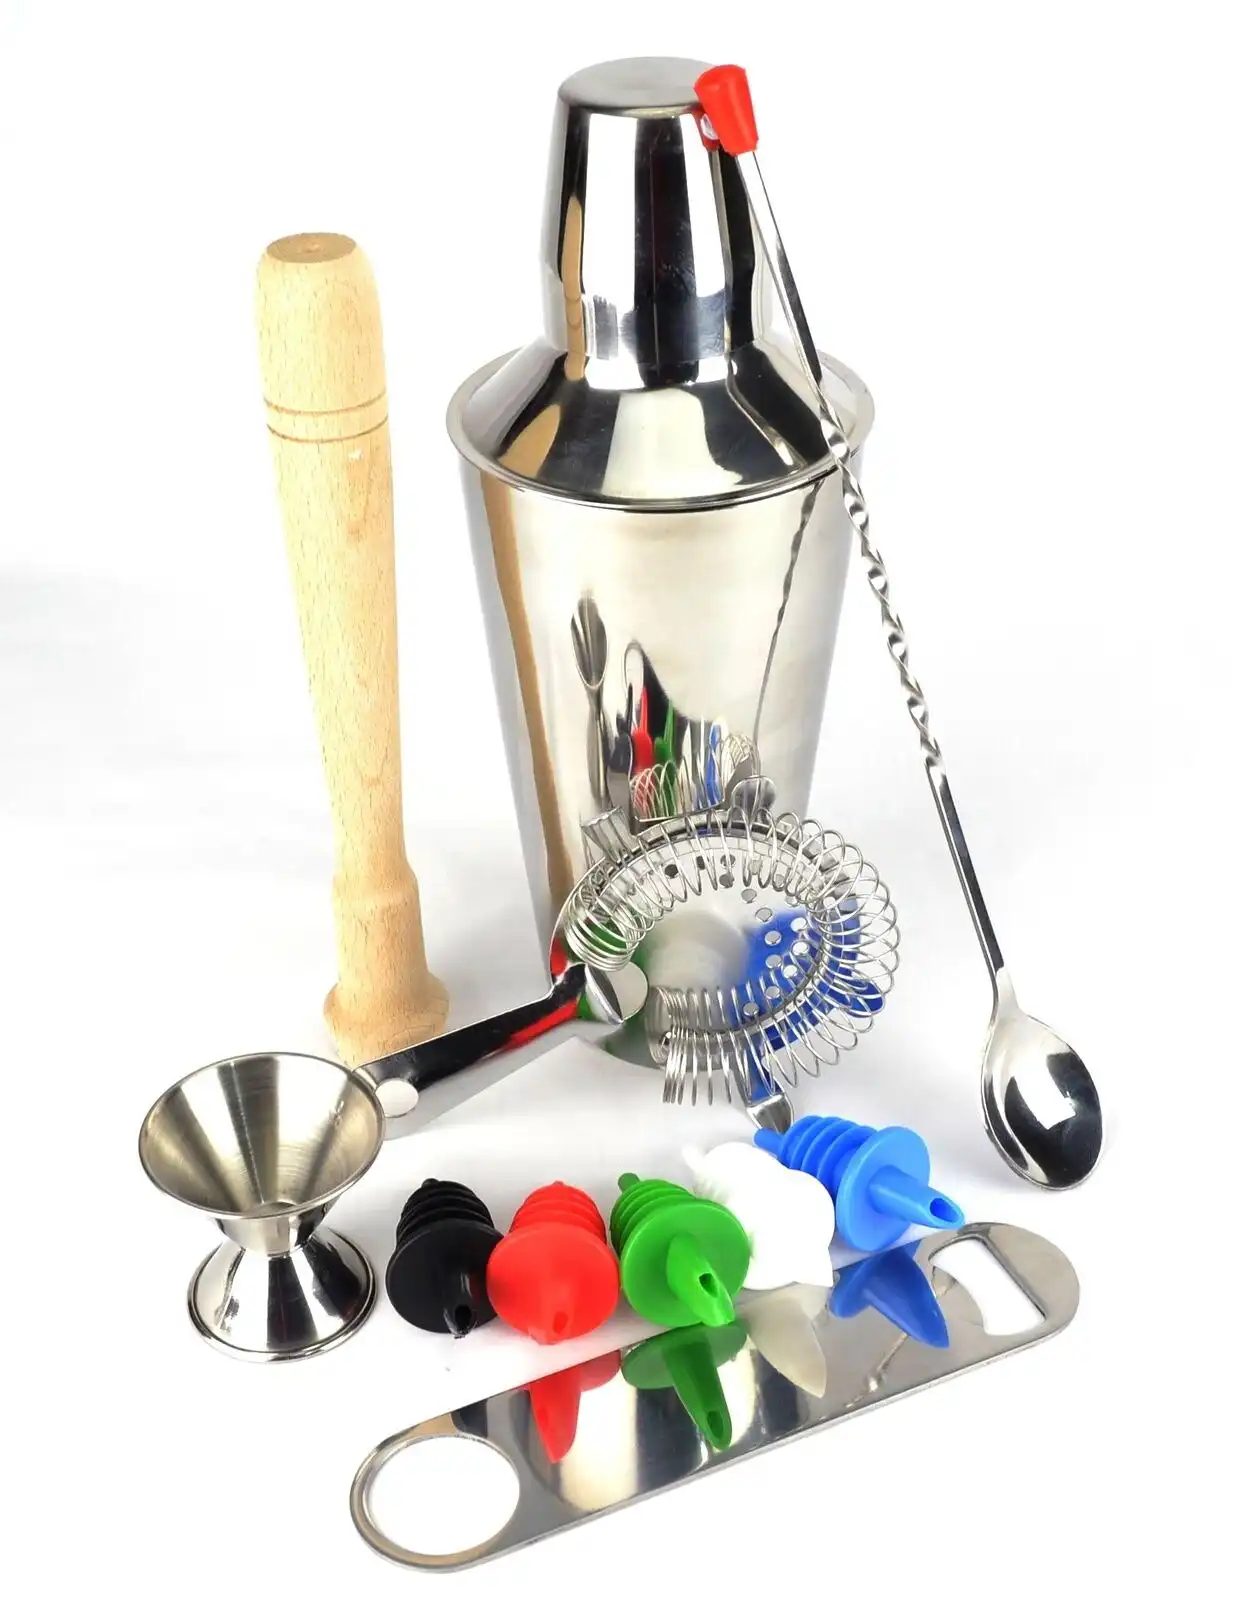 10 Piece Cocktail Shaker Set With Couloured Pourers And A Free Bar Blade